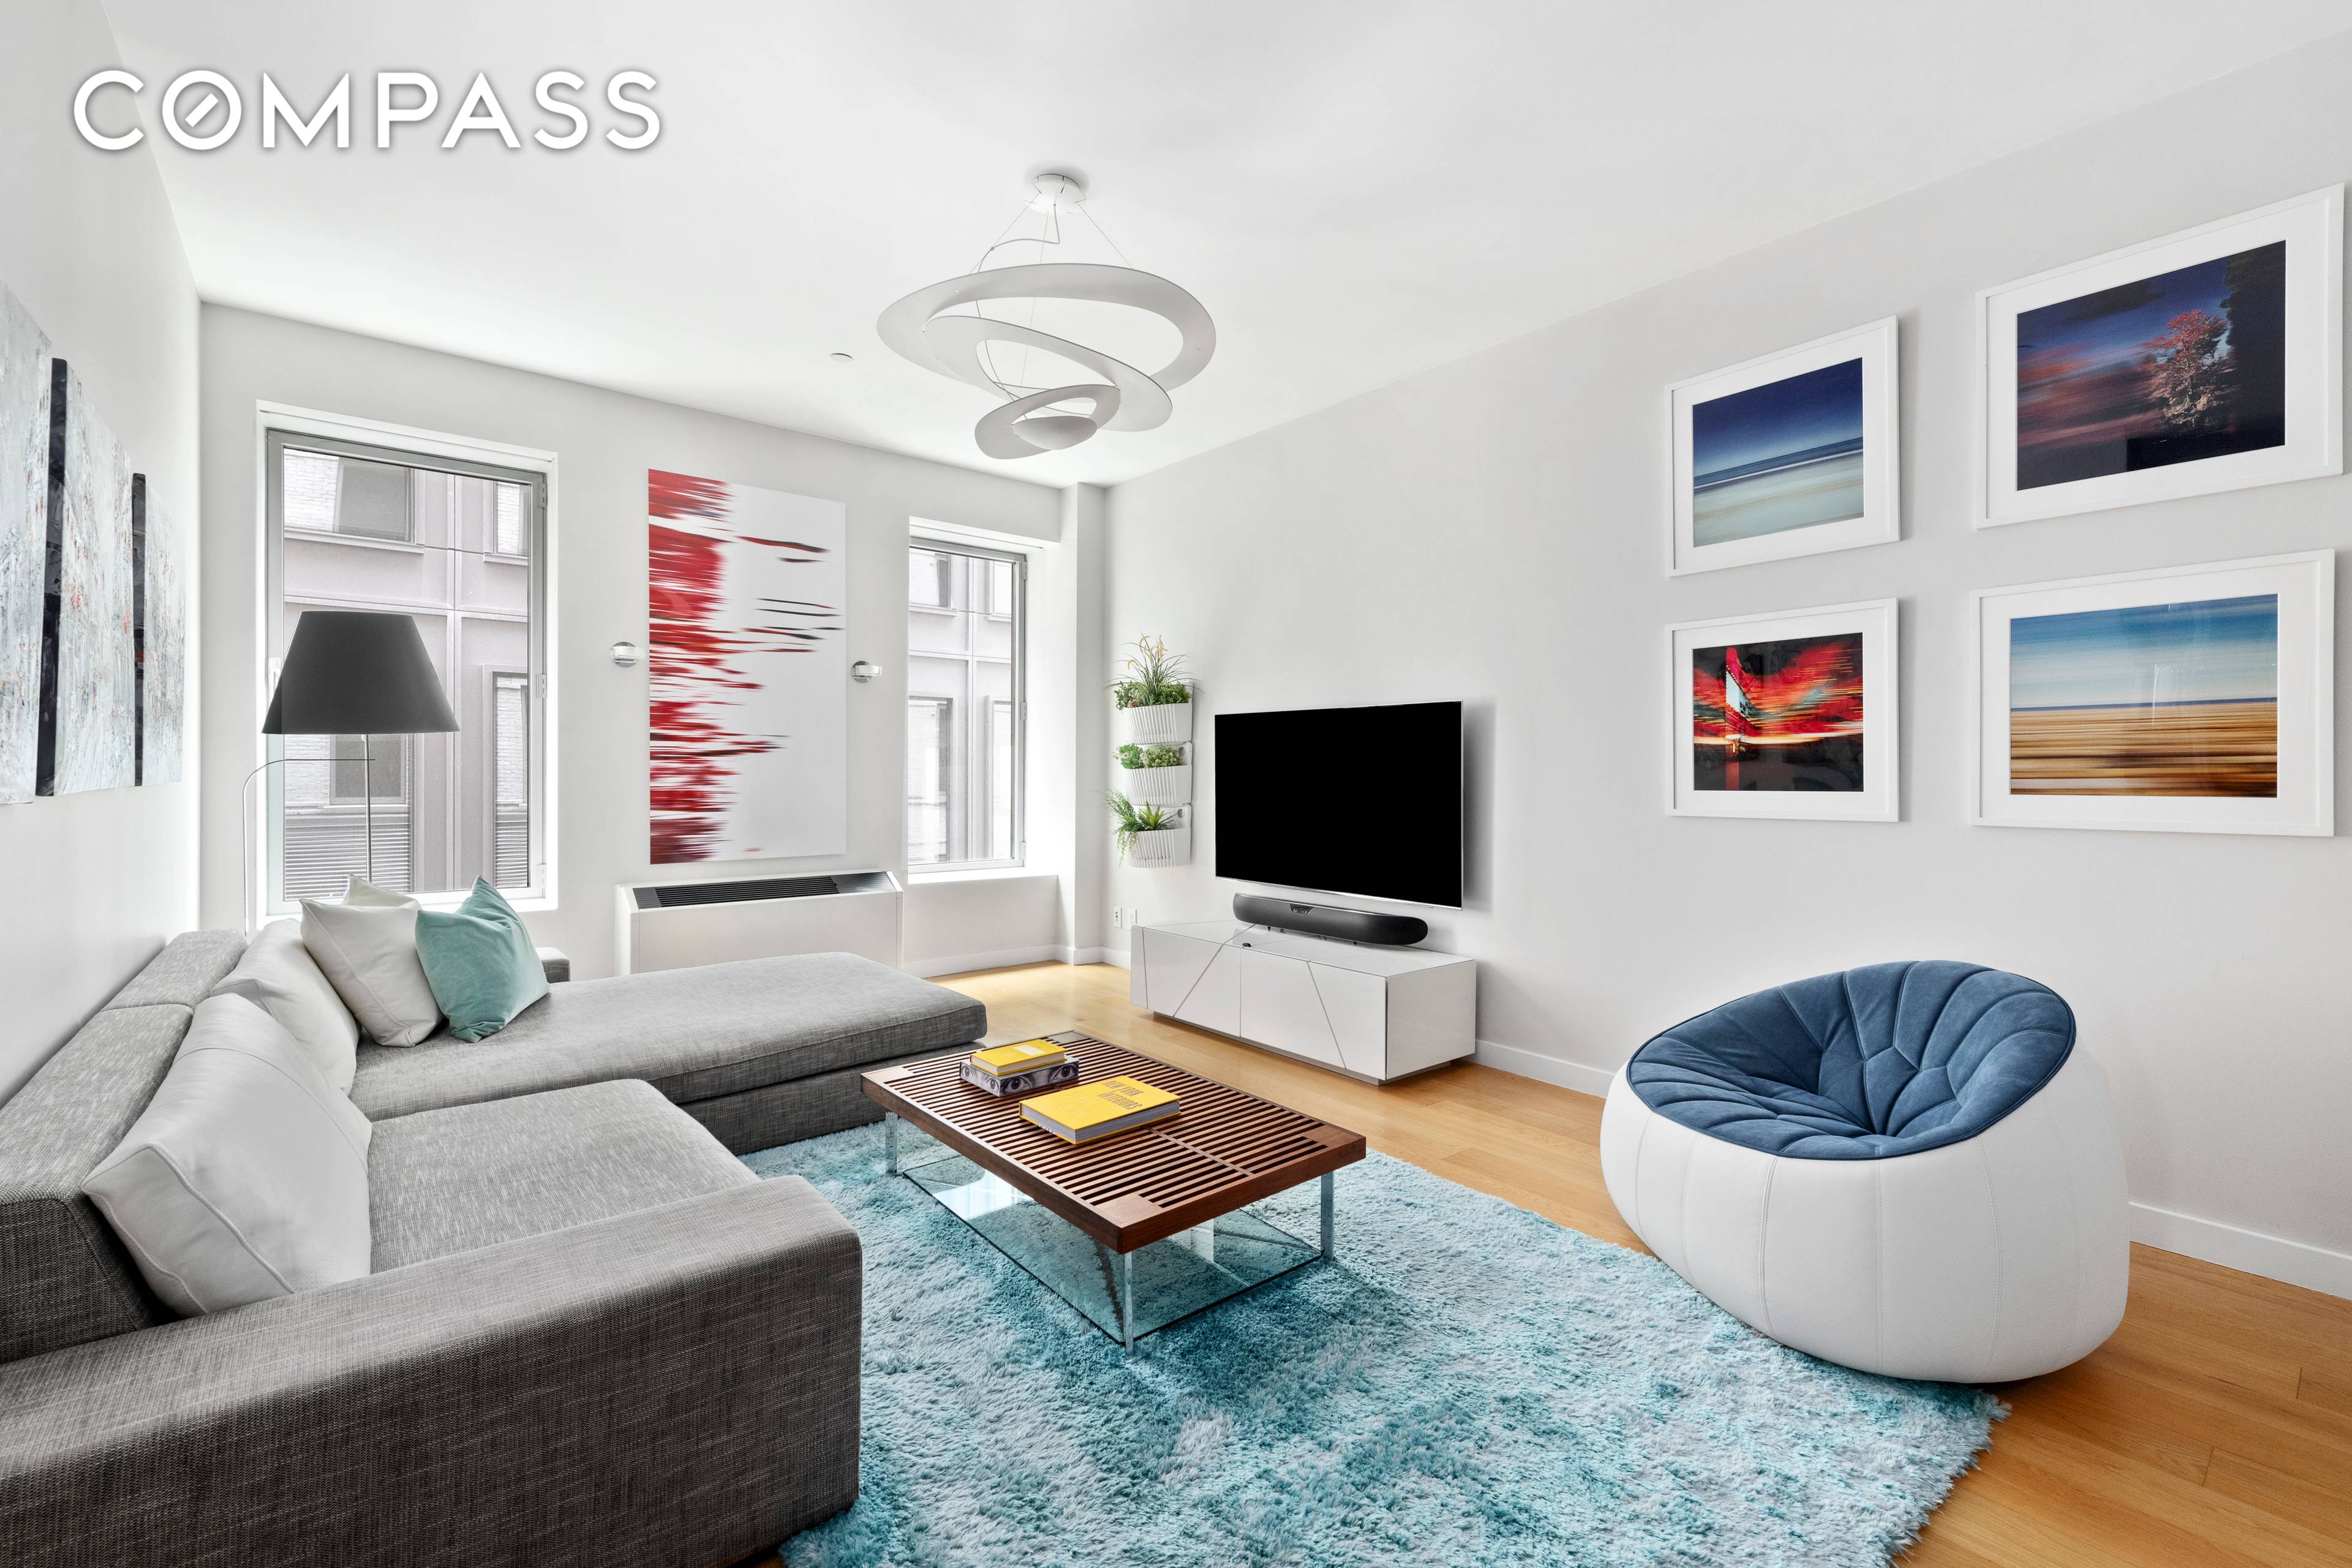 Start planning your move to TriBeCa or start building equity instead of renting in TriBeCa !